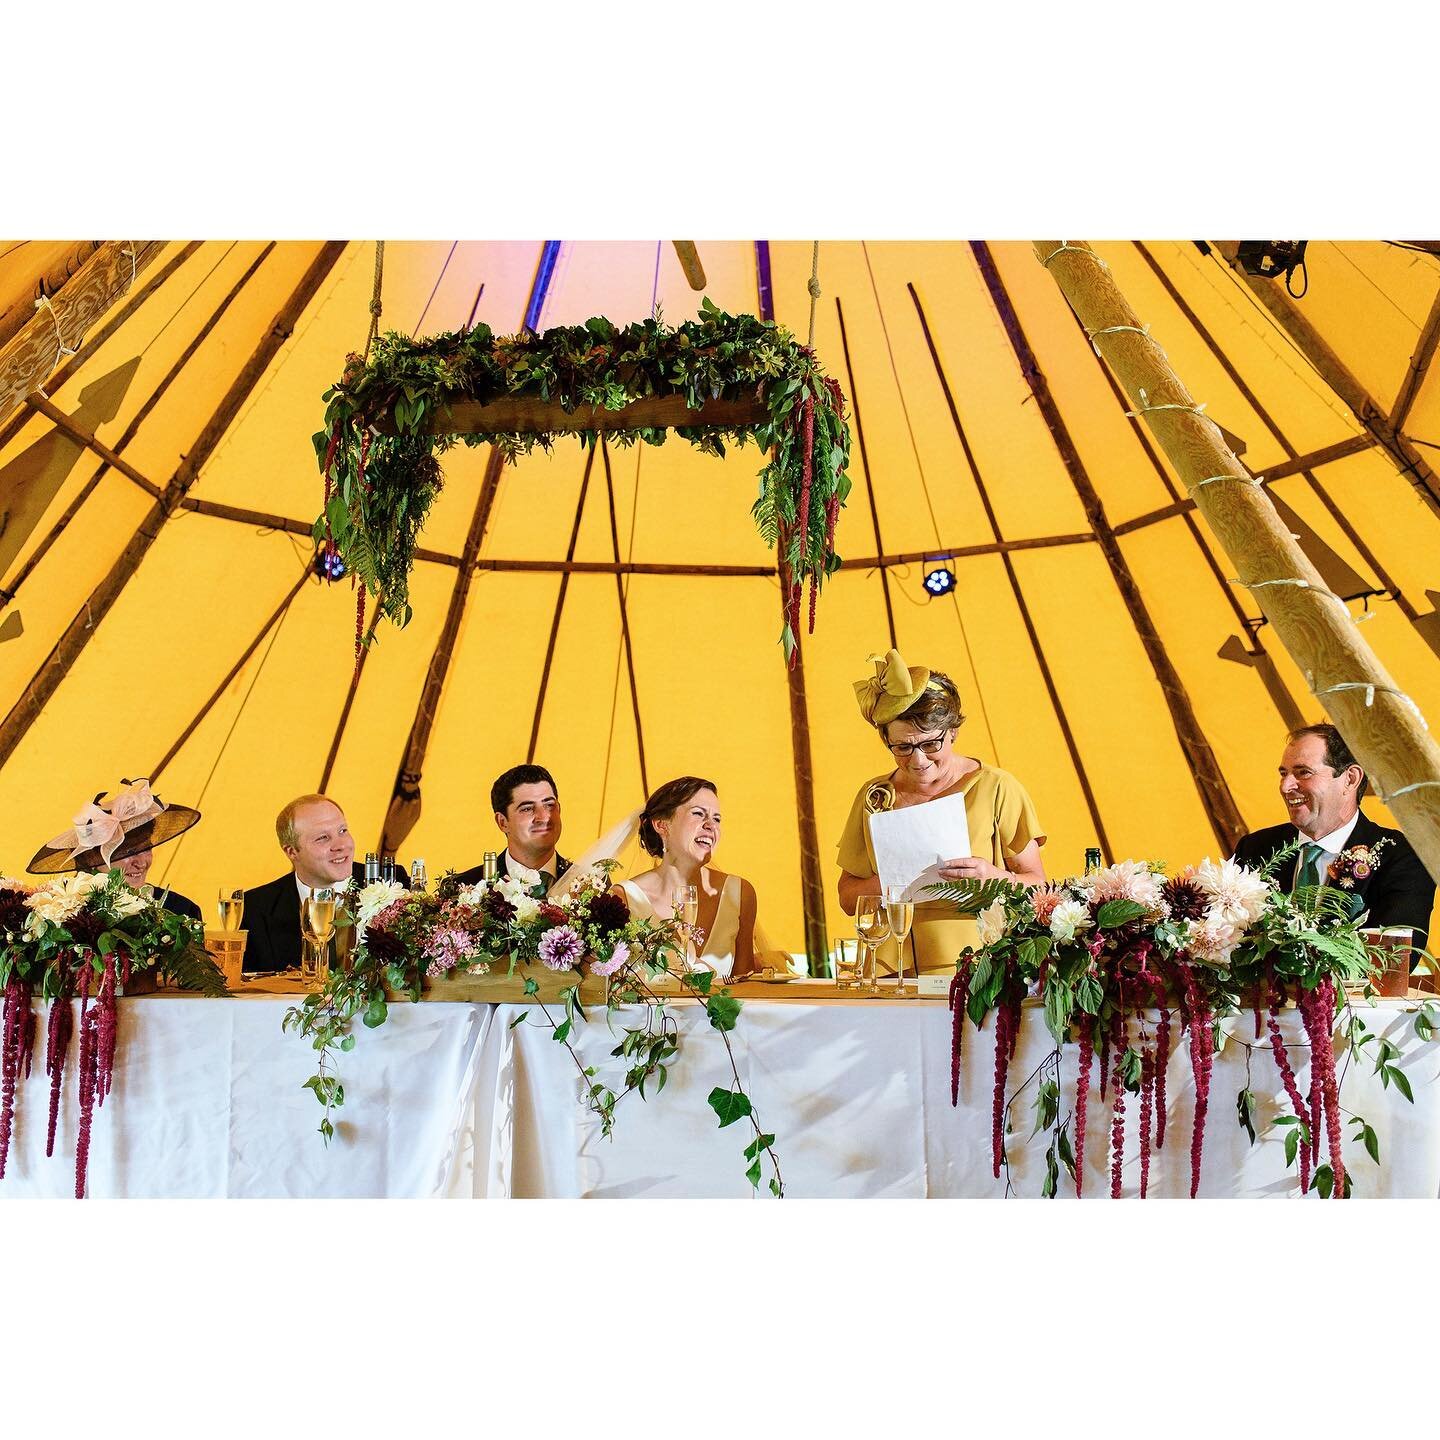 Here&rsquo;s part 2 of Bethan and Henry&rsquo;s amazing wedding story! A festival theme wedding with a unique tipi set-up on Bethan&rsquo;s family farm.❤️
More to follow&hellip;.
.
.
#weddingphotostory #weddingphotos #candidweddingphotography #report